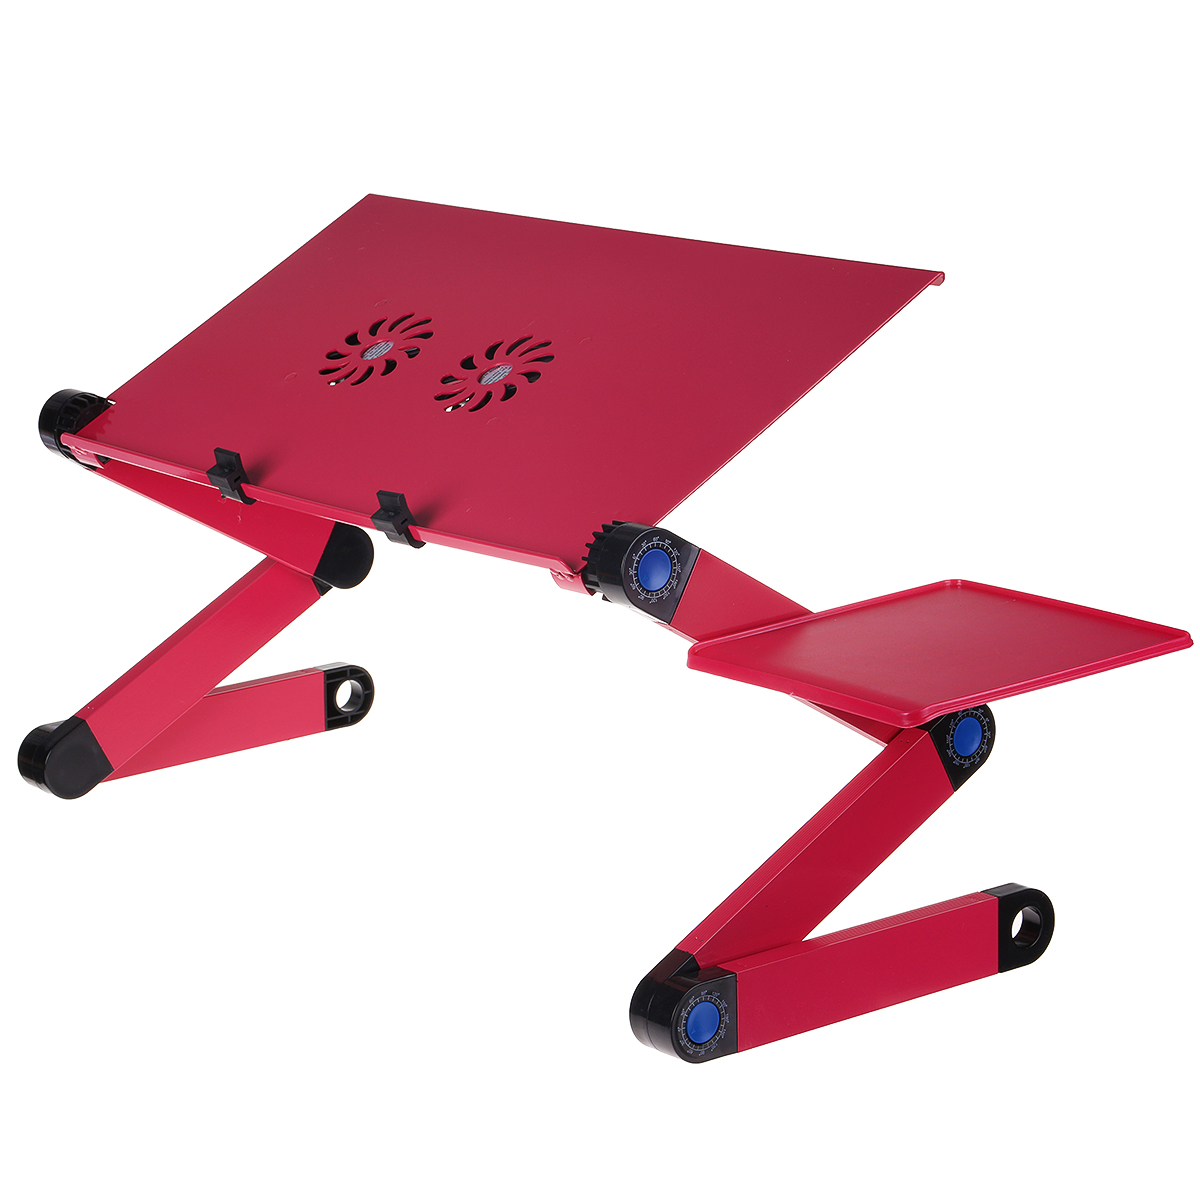 Cooling-Laptop-Desk-360-Degree-Aluminum-Alloy-Adjustable-Foldable-Cooling-Notebook-Table-for-Sofa-Be-1786133-17